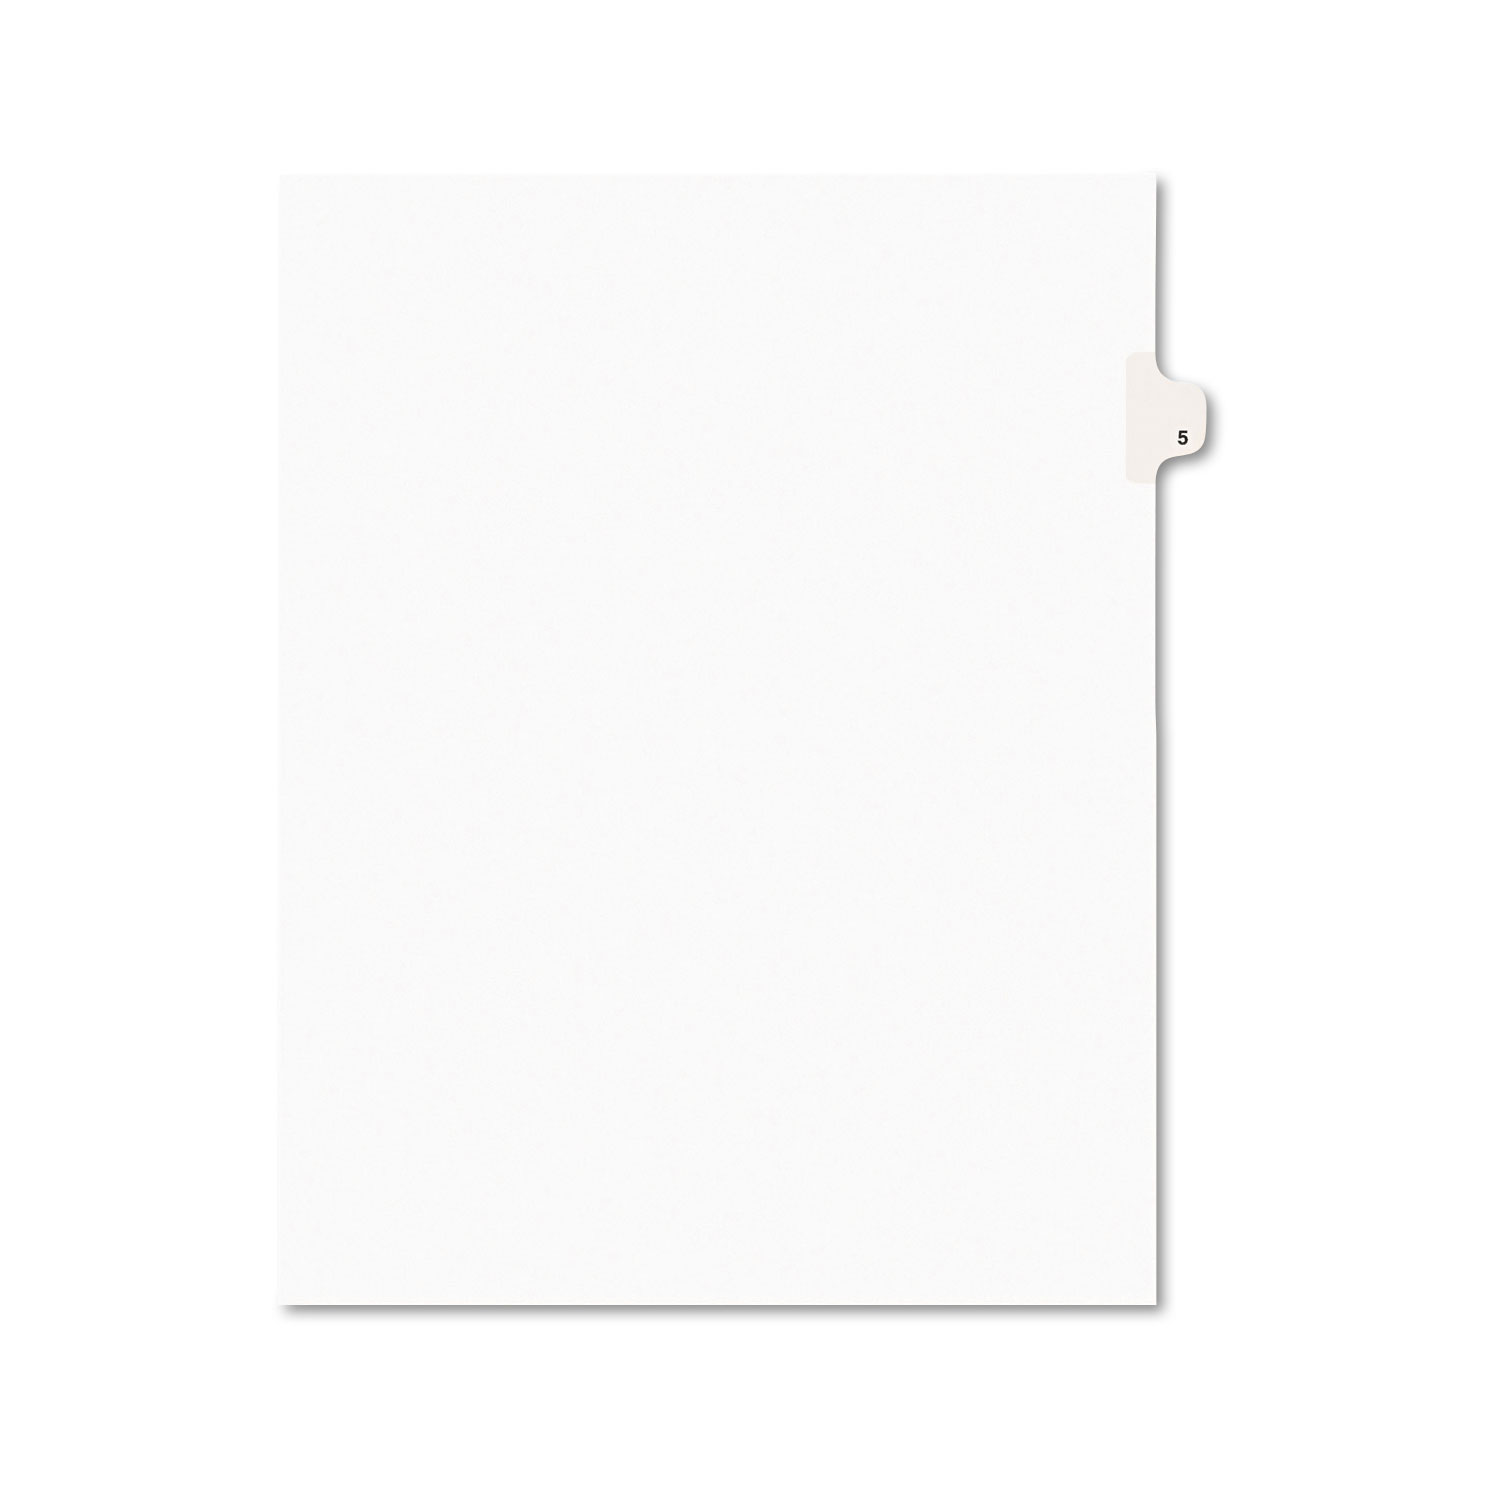  Avery 11915 Preprinted Legal Exhibit Side Tab Index Dividers, Avery Style, 10-Tab, 5, 11 x 8.5, White, 25/Pack (AVE11915) 